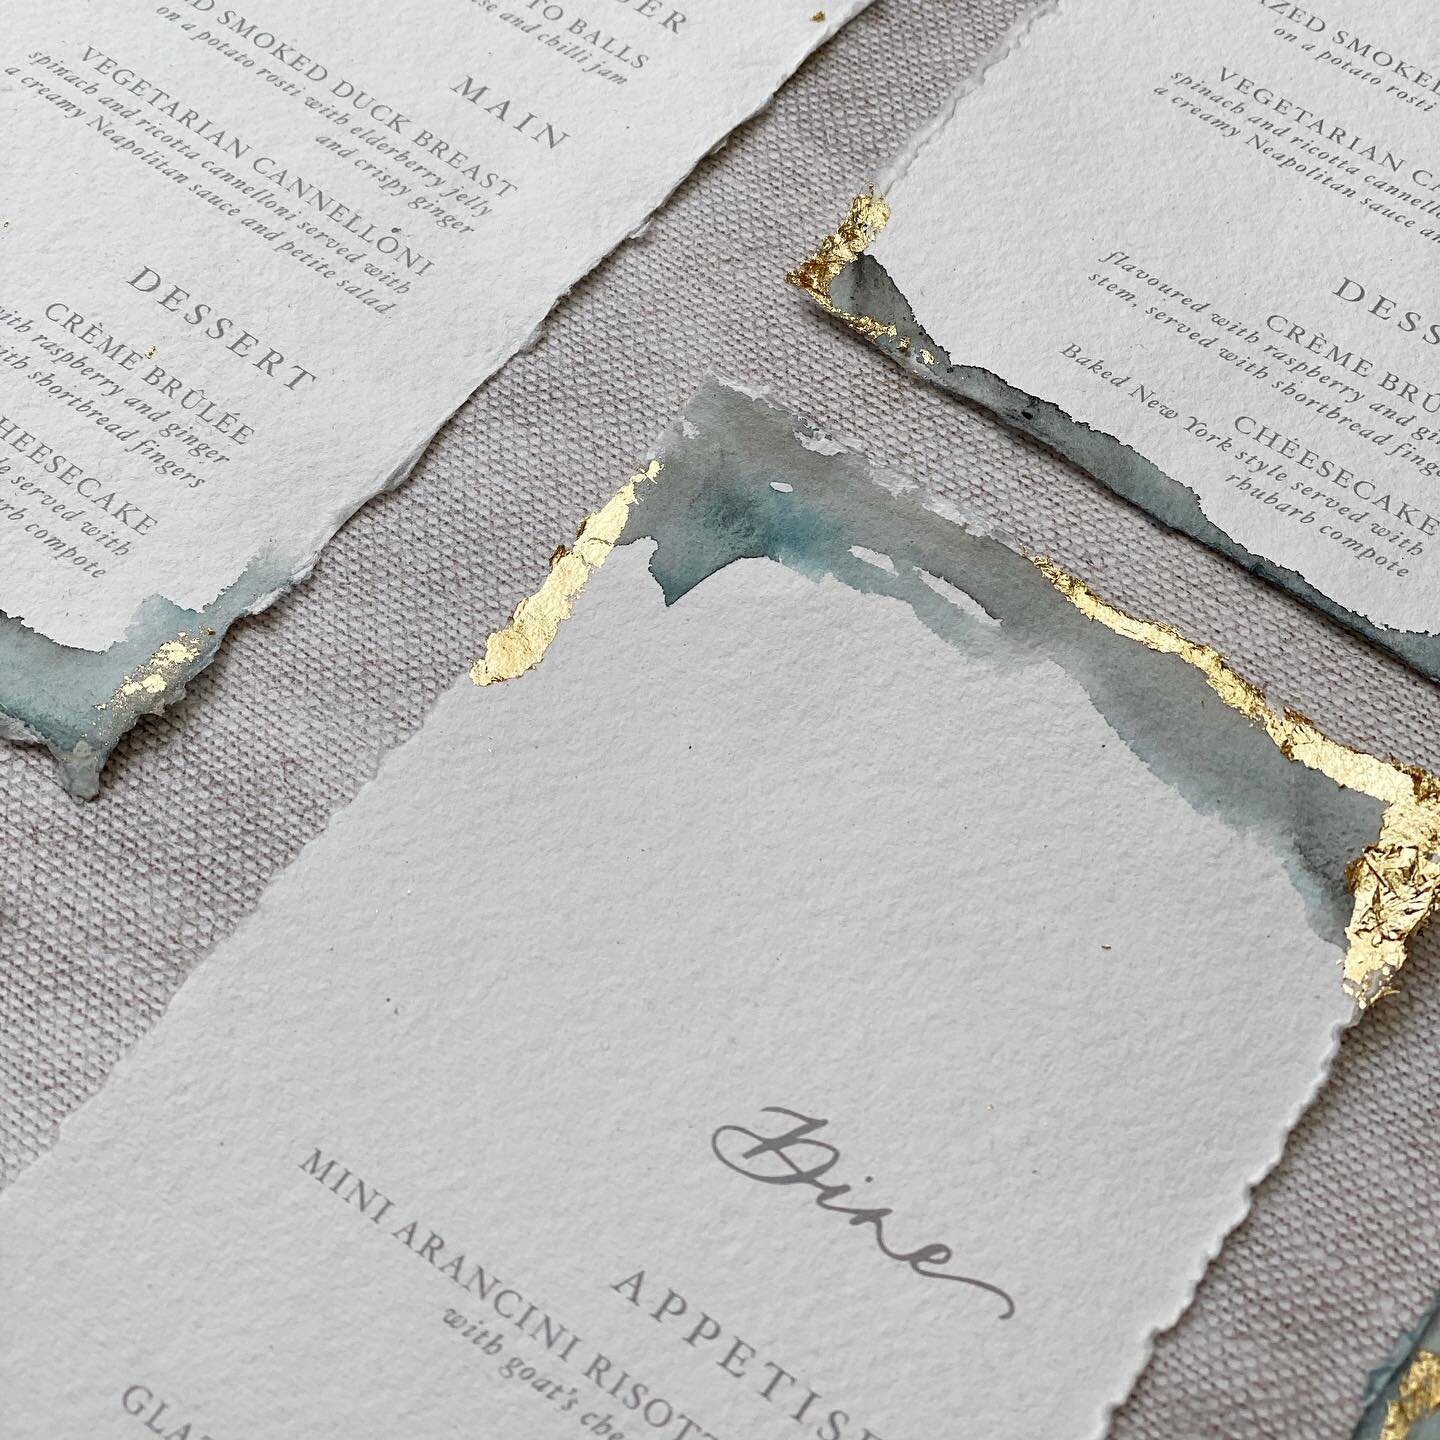 H A N D  F I N I S H // ✨

Whether watercolour washes and gold foiled edges, stamping wax seals or punching eyelets and tying ribbons and tassels, only a stationer will know how many countless hours go into adding those perfect finishing touches to e